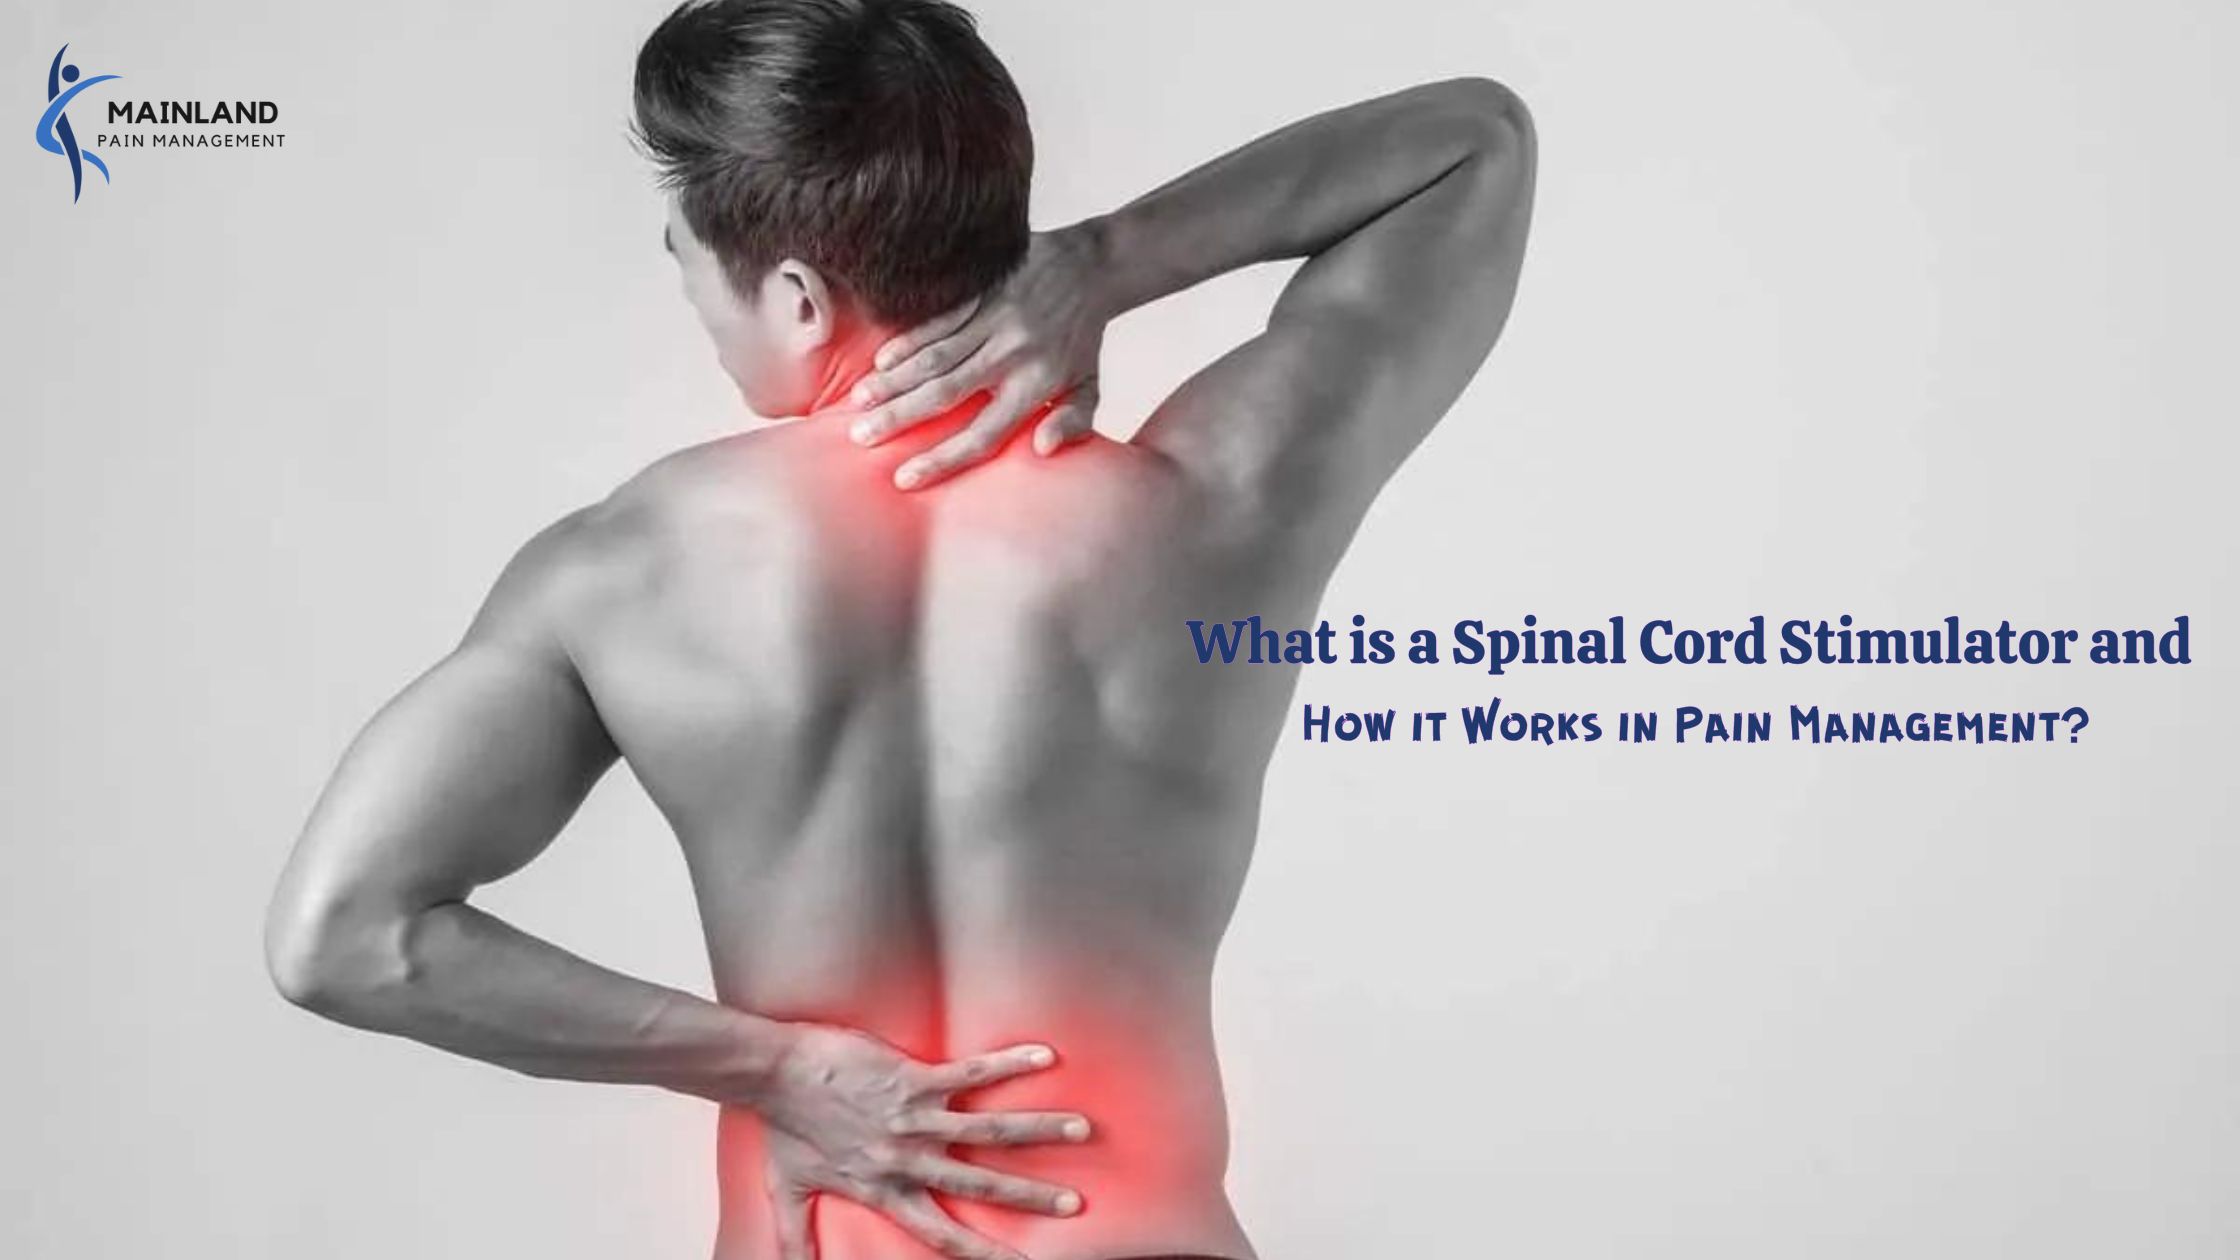 What is a Spinal Cord Stimulator and How it Works in Pain Management